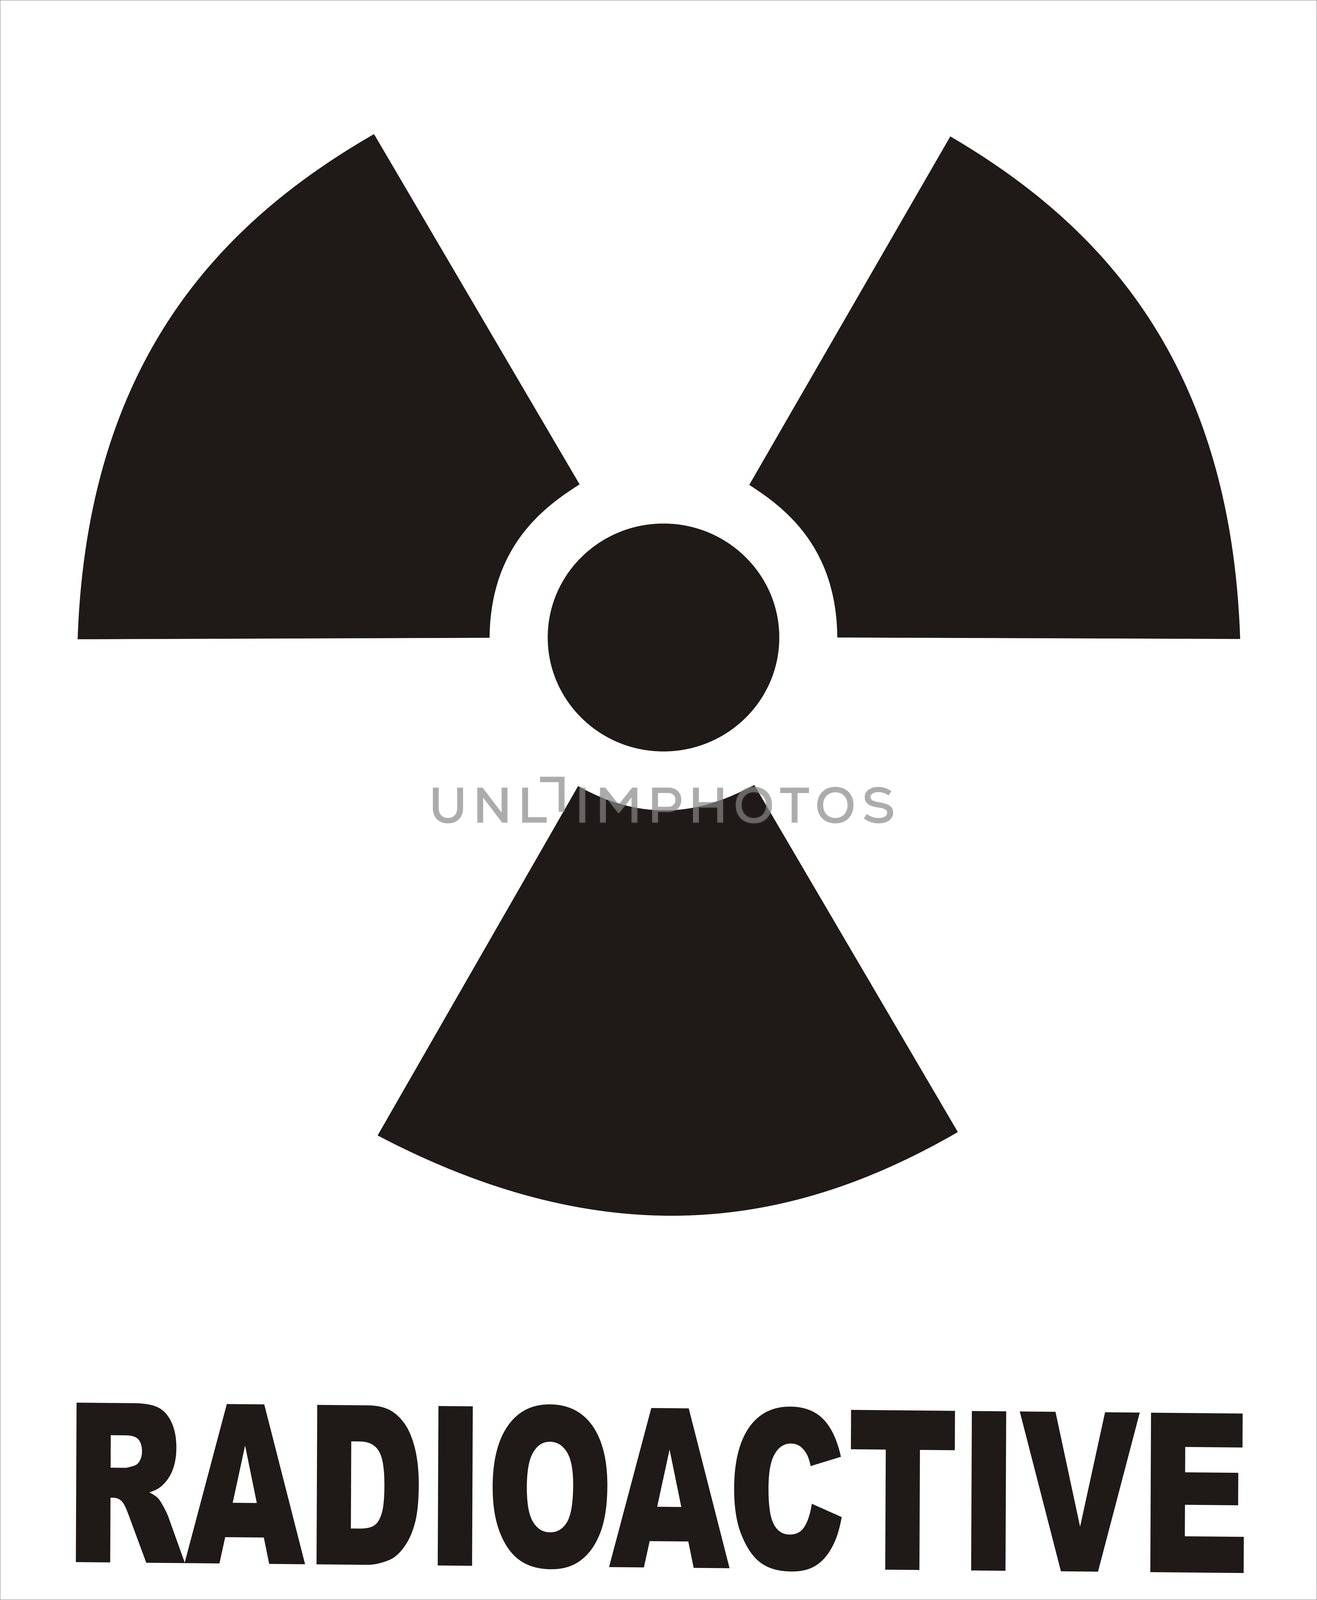 A new shape sign showing radioactive danger